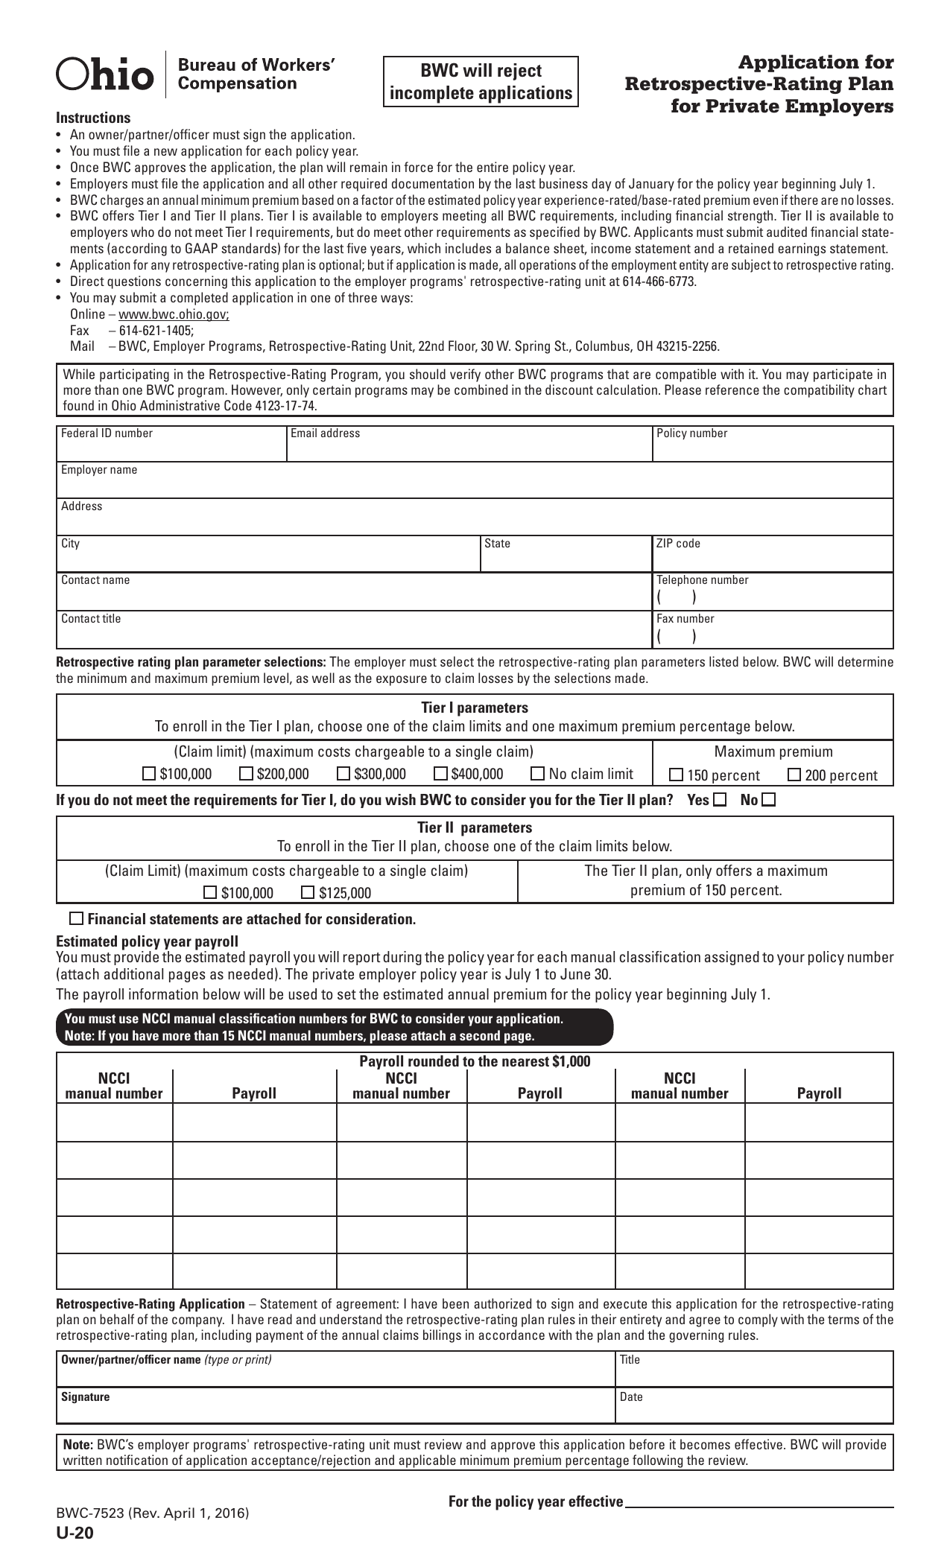 Form U-20 (BWC-7523) Application for Retrospective-Rating Plan for Private Employers - Ohio, Page 1